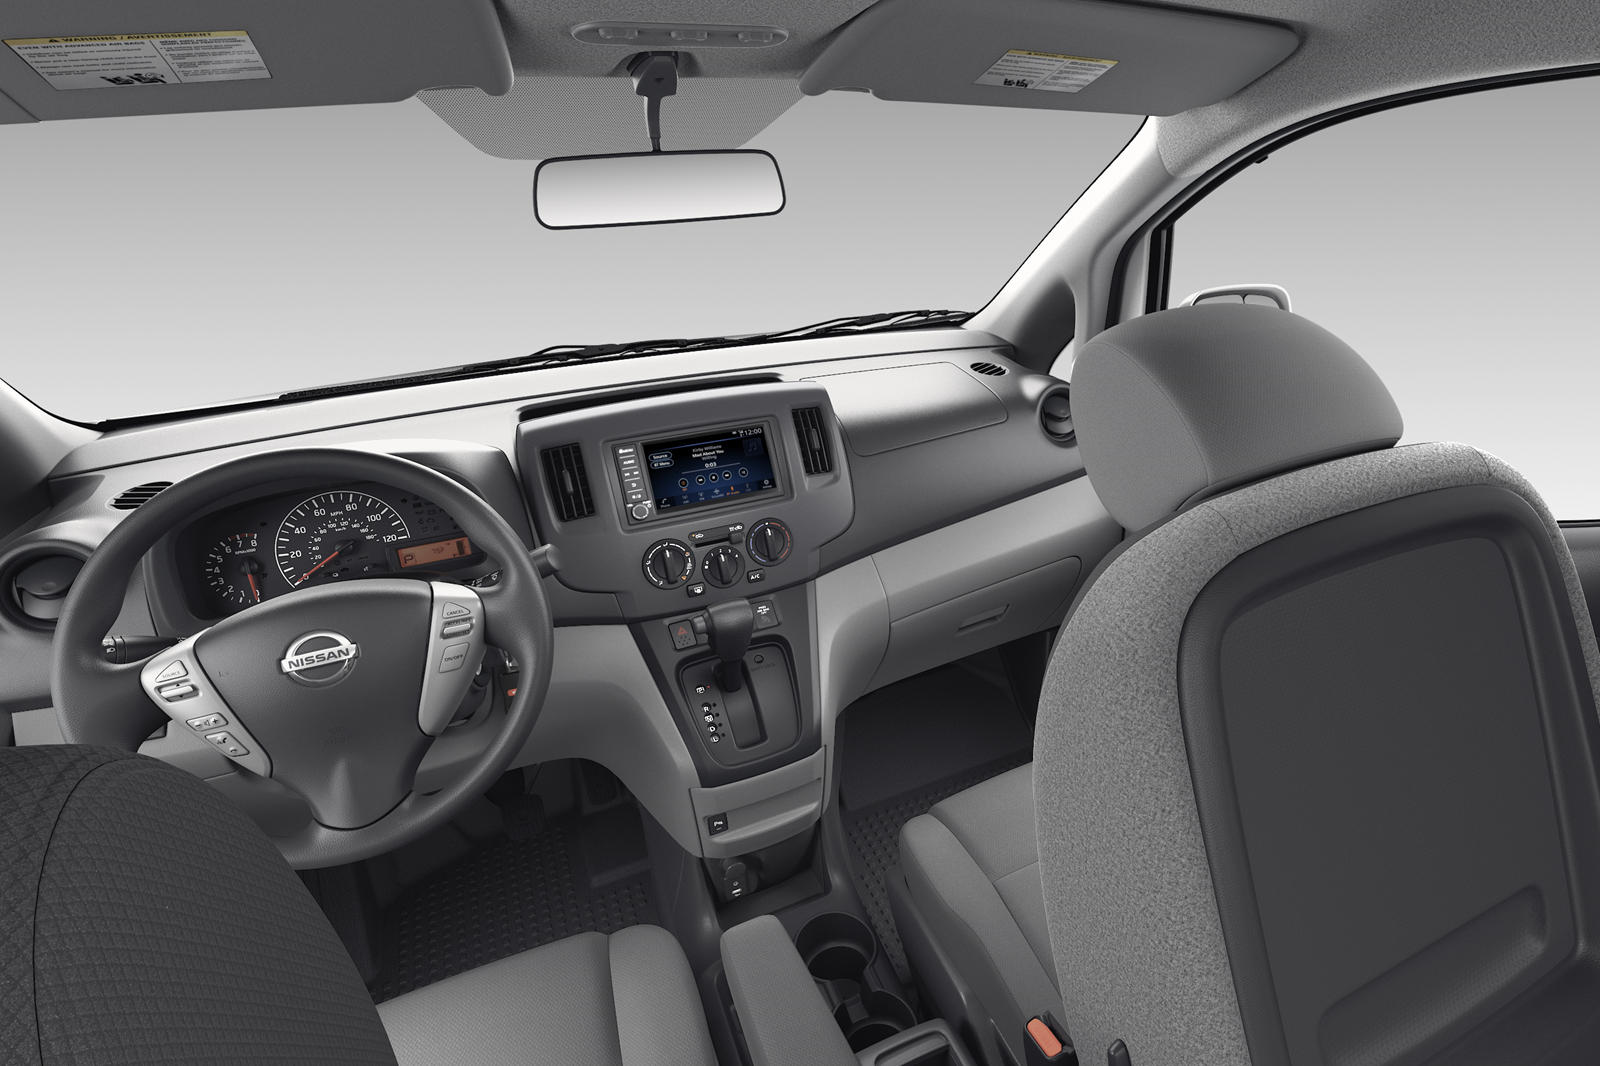 2021 Nissan NV200 Compact Cargo Interior Dimensions: Seating, Cargo Space & Trunk  Size - Photos